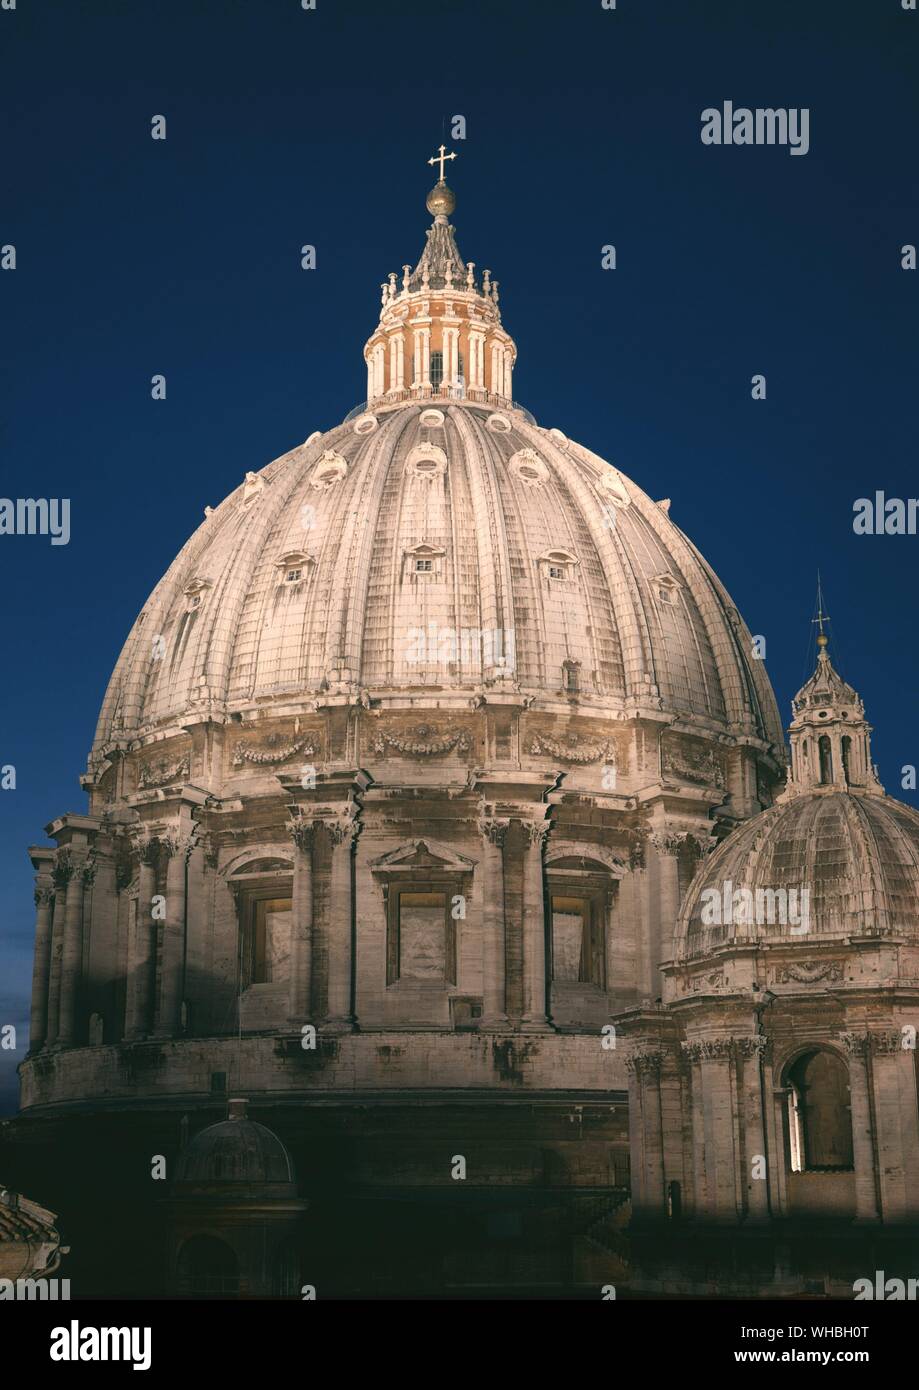 Dome of St. Peter's in Rome by night. Stock Photo